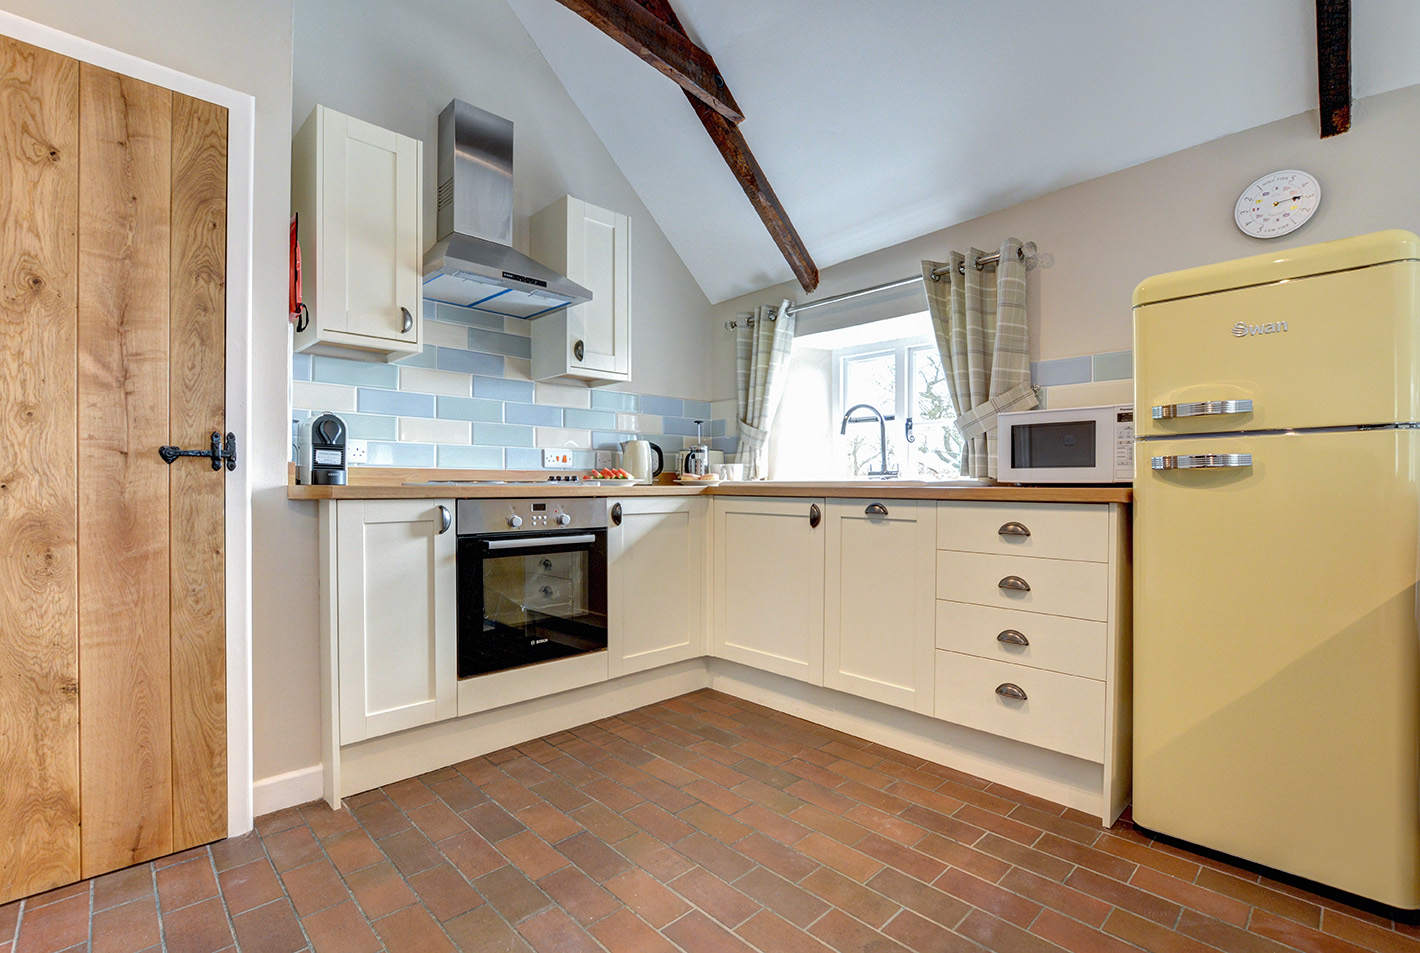 The kitchen of Otterbridge luxury self catering converted barn holiday cottage at Penrose Burden in North Cornwall.jpg